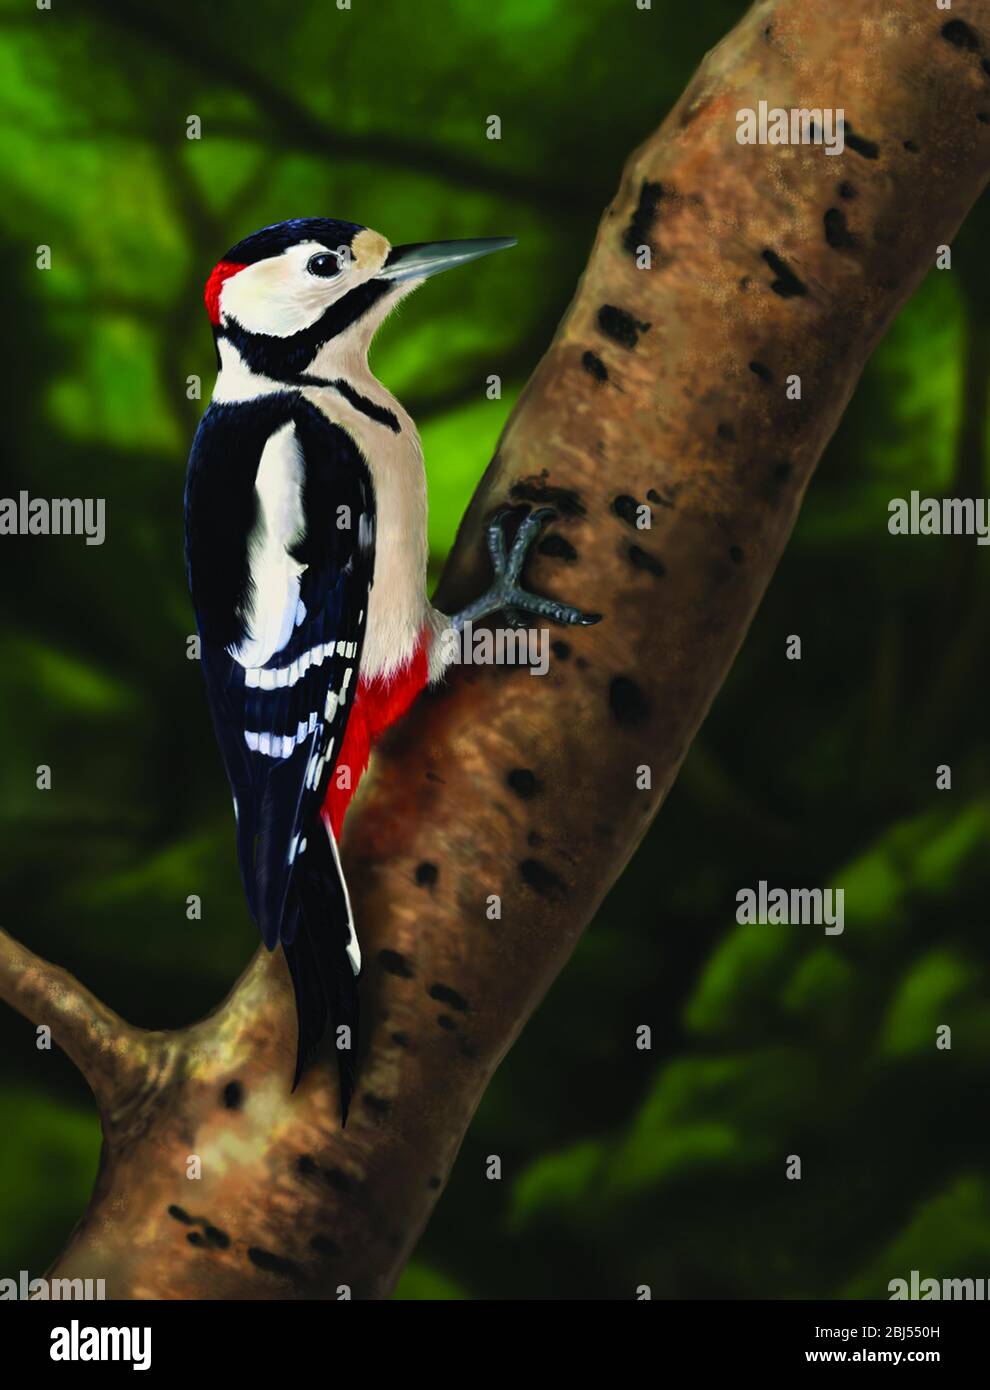 Greater Spotted Woodpecker (Digital Painting). The Great Spotted Woodpecker (or Greater Spotted Woodpecker). Stock Photo